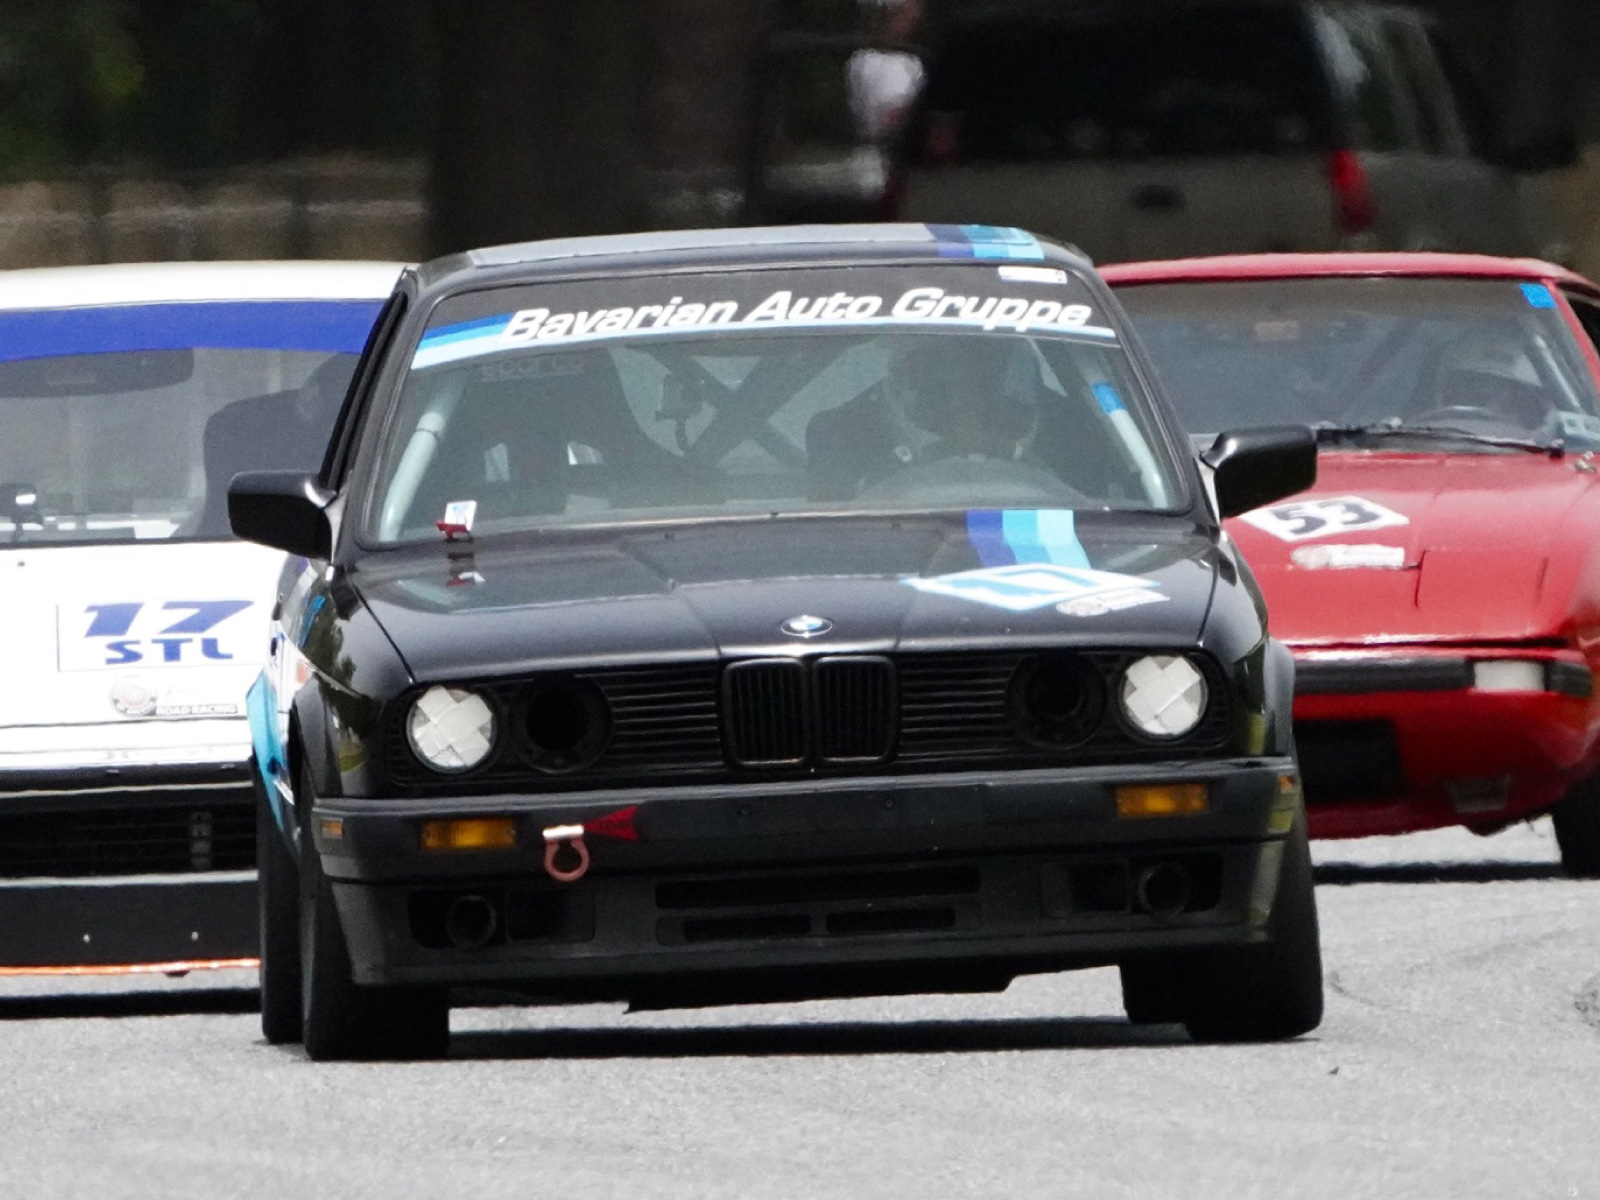 Road Racing with the Buccaneer Region of the SCCA